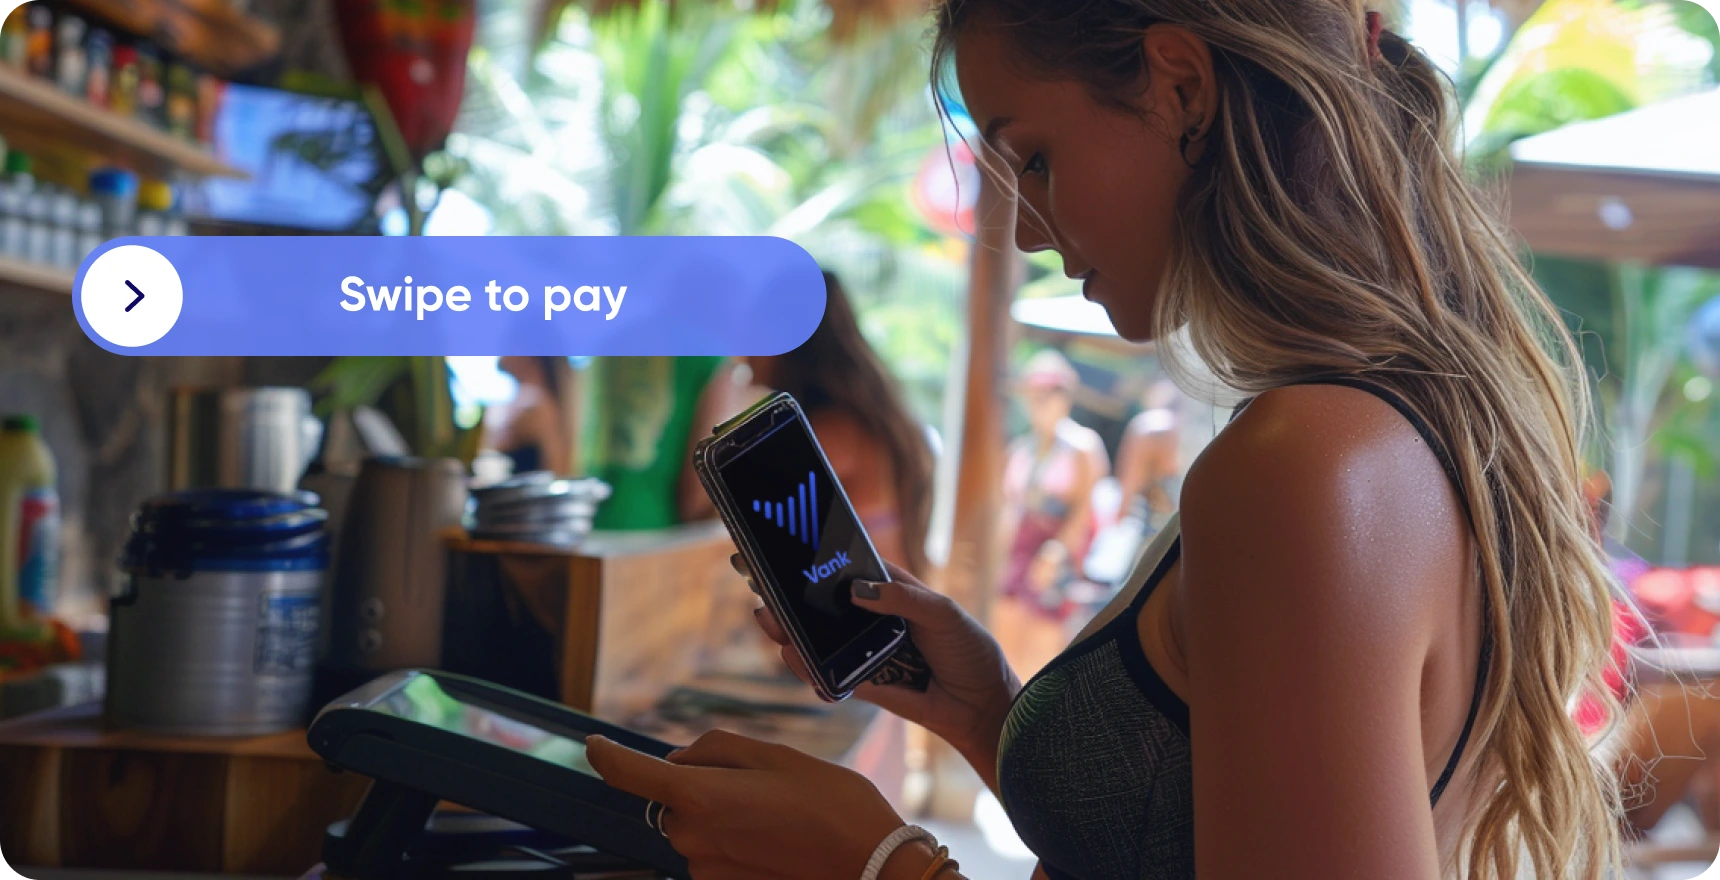 Image of a woman making a payment at a store using her cellphone, showcasing mobile payment technology in action.